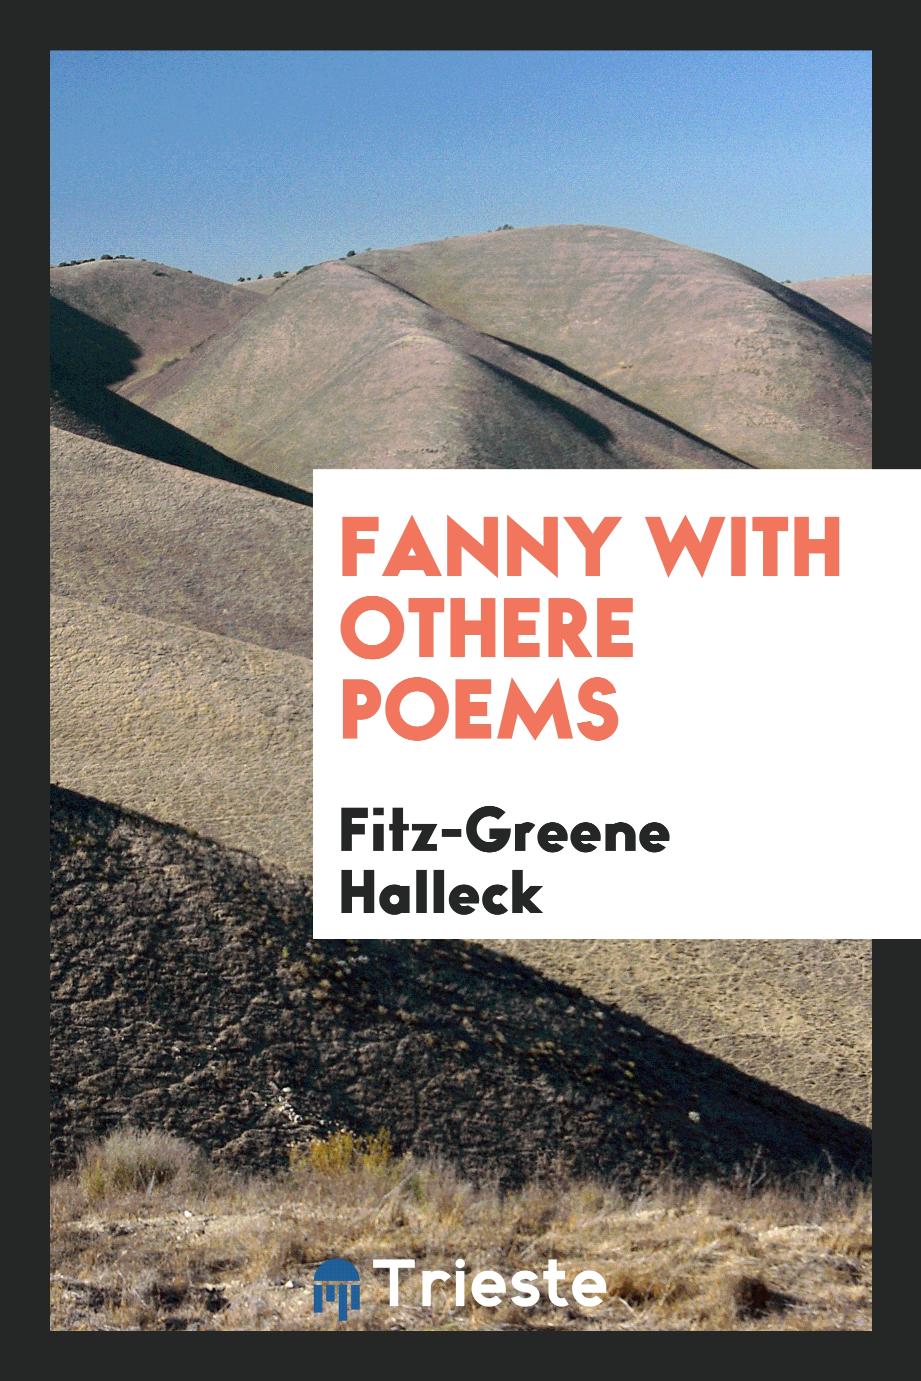 Fanny with Othere Poems